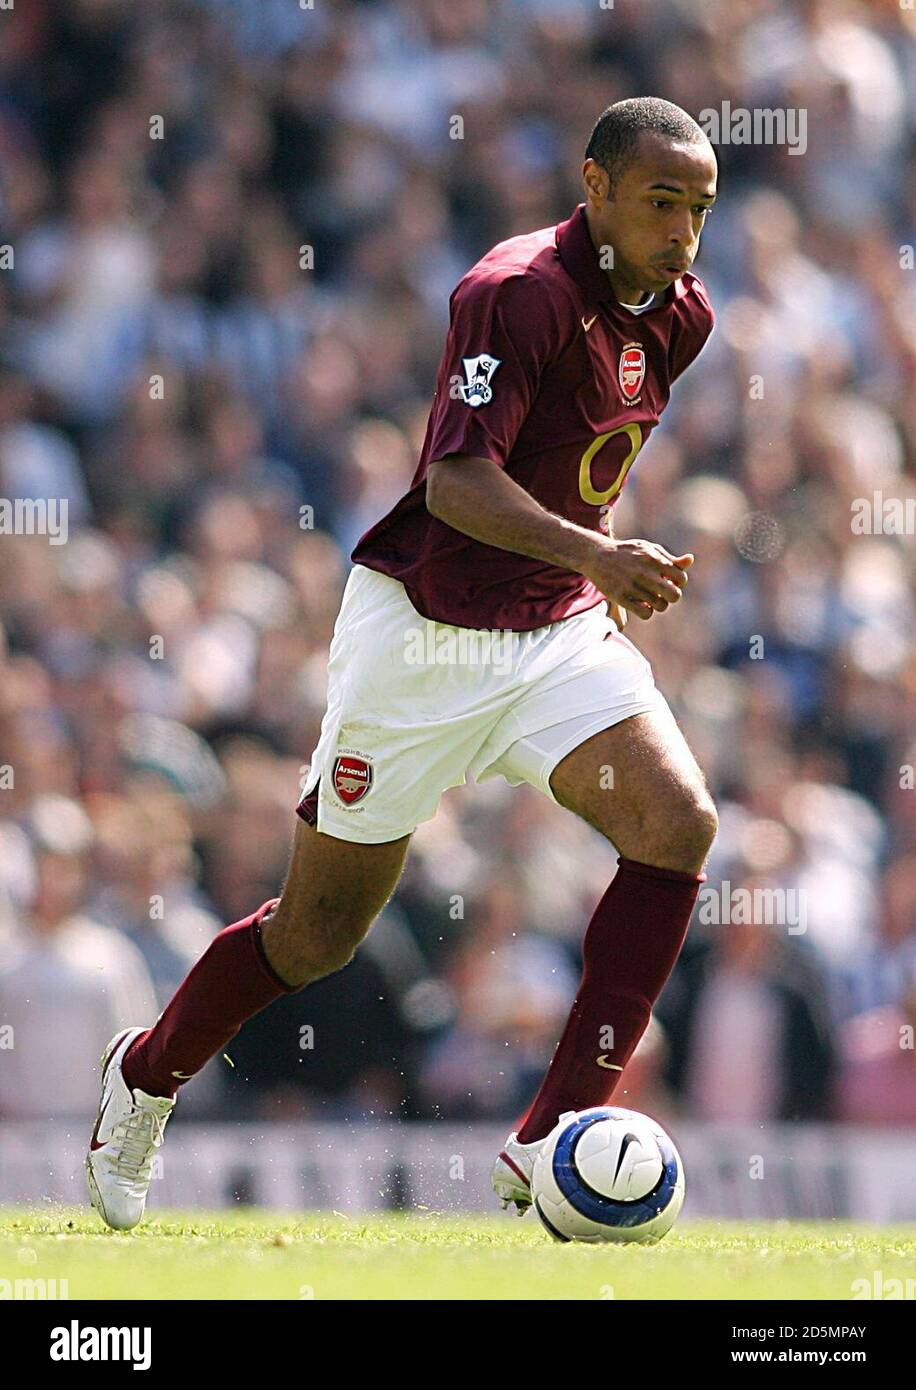 ON THIS DAY: In 2004, Thierry Henry - SOCCER WORLD NEWS HQ